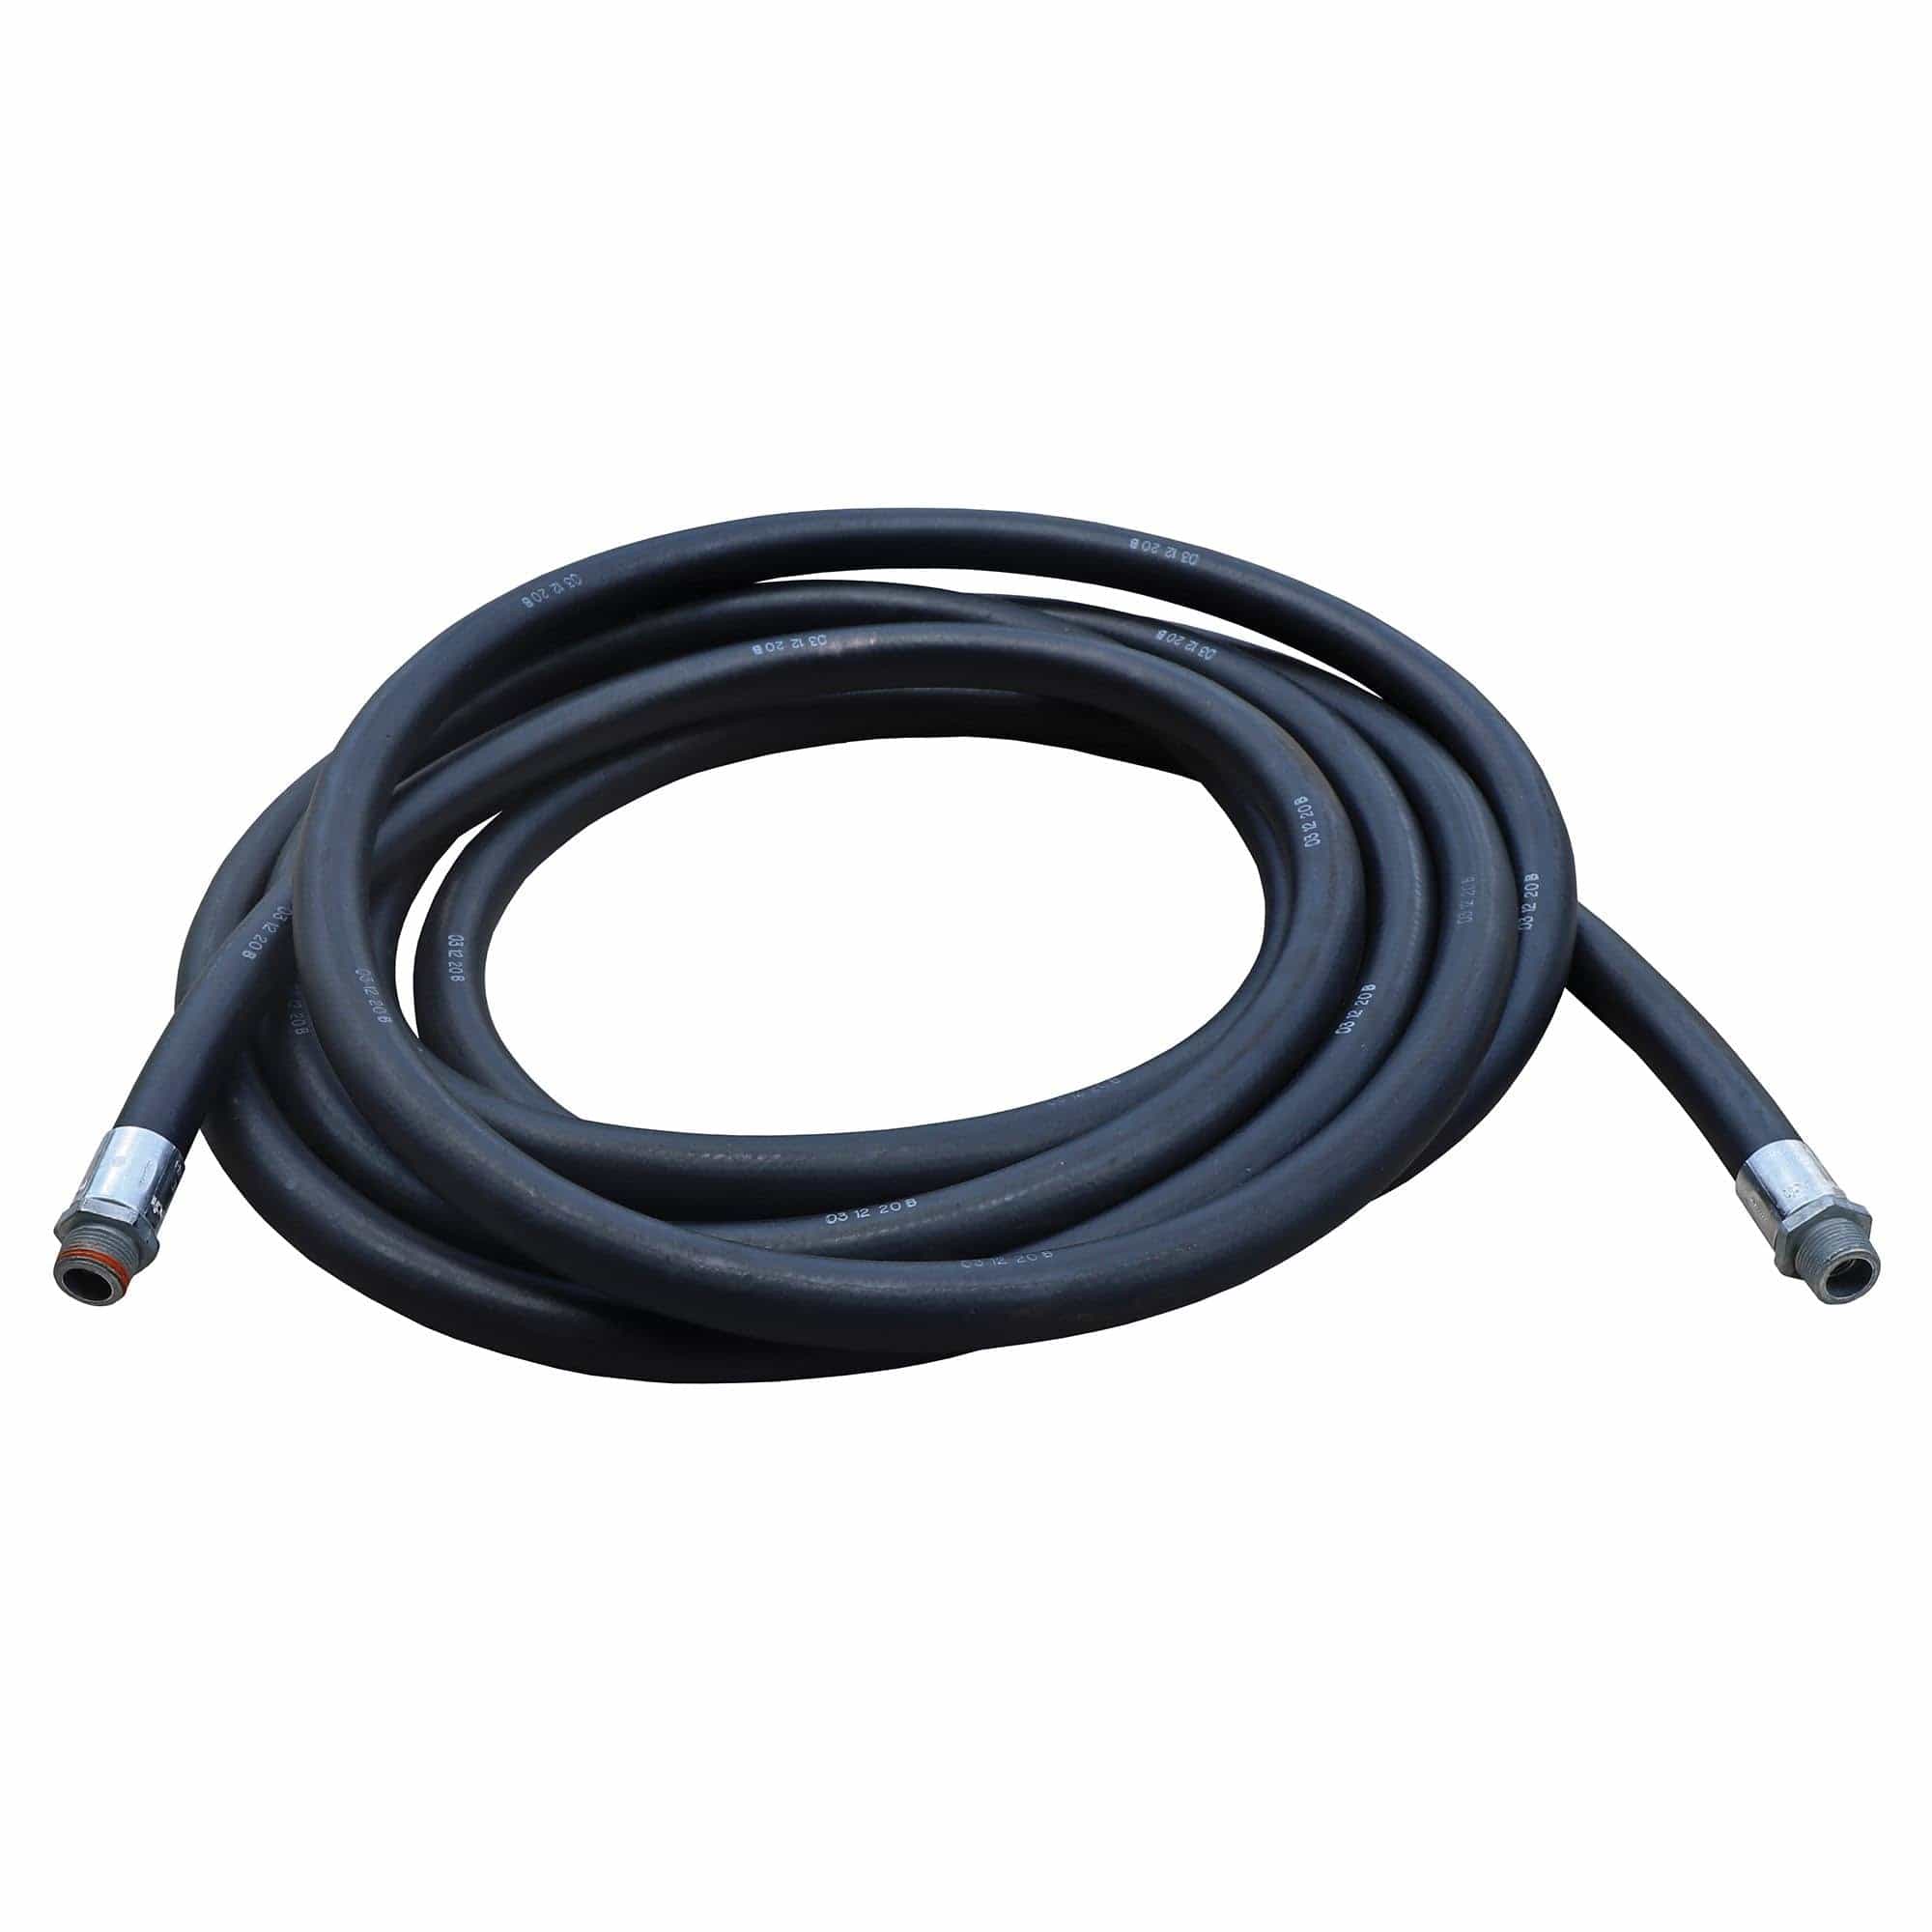 Find high-quality CO2 fire extinguisher hoses at Supply Master Ghana, Accra. Our durable and reliable hoses are designed for effective fire suppression, allowing for the controlled discharge of CO2 to extinguish fires quickly and efficiently. Fire Extinguisher Buy Tools hardware Building materials